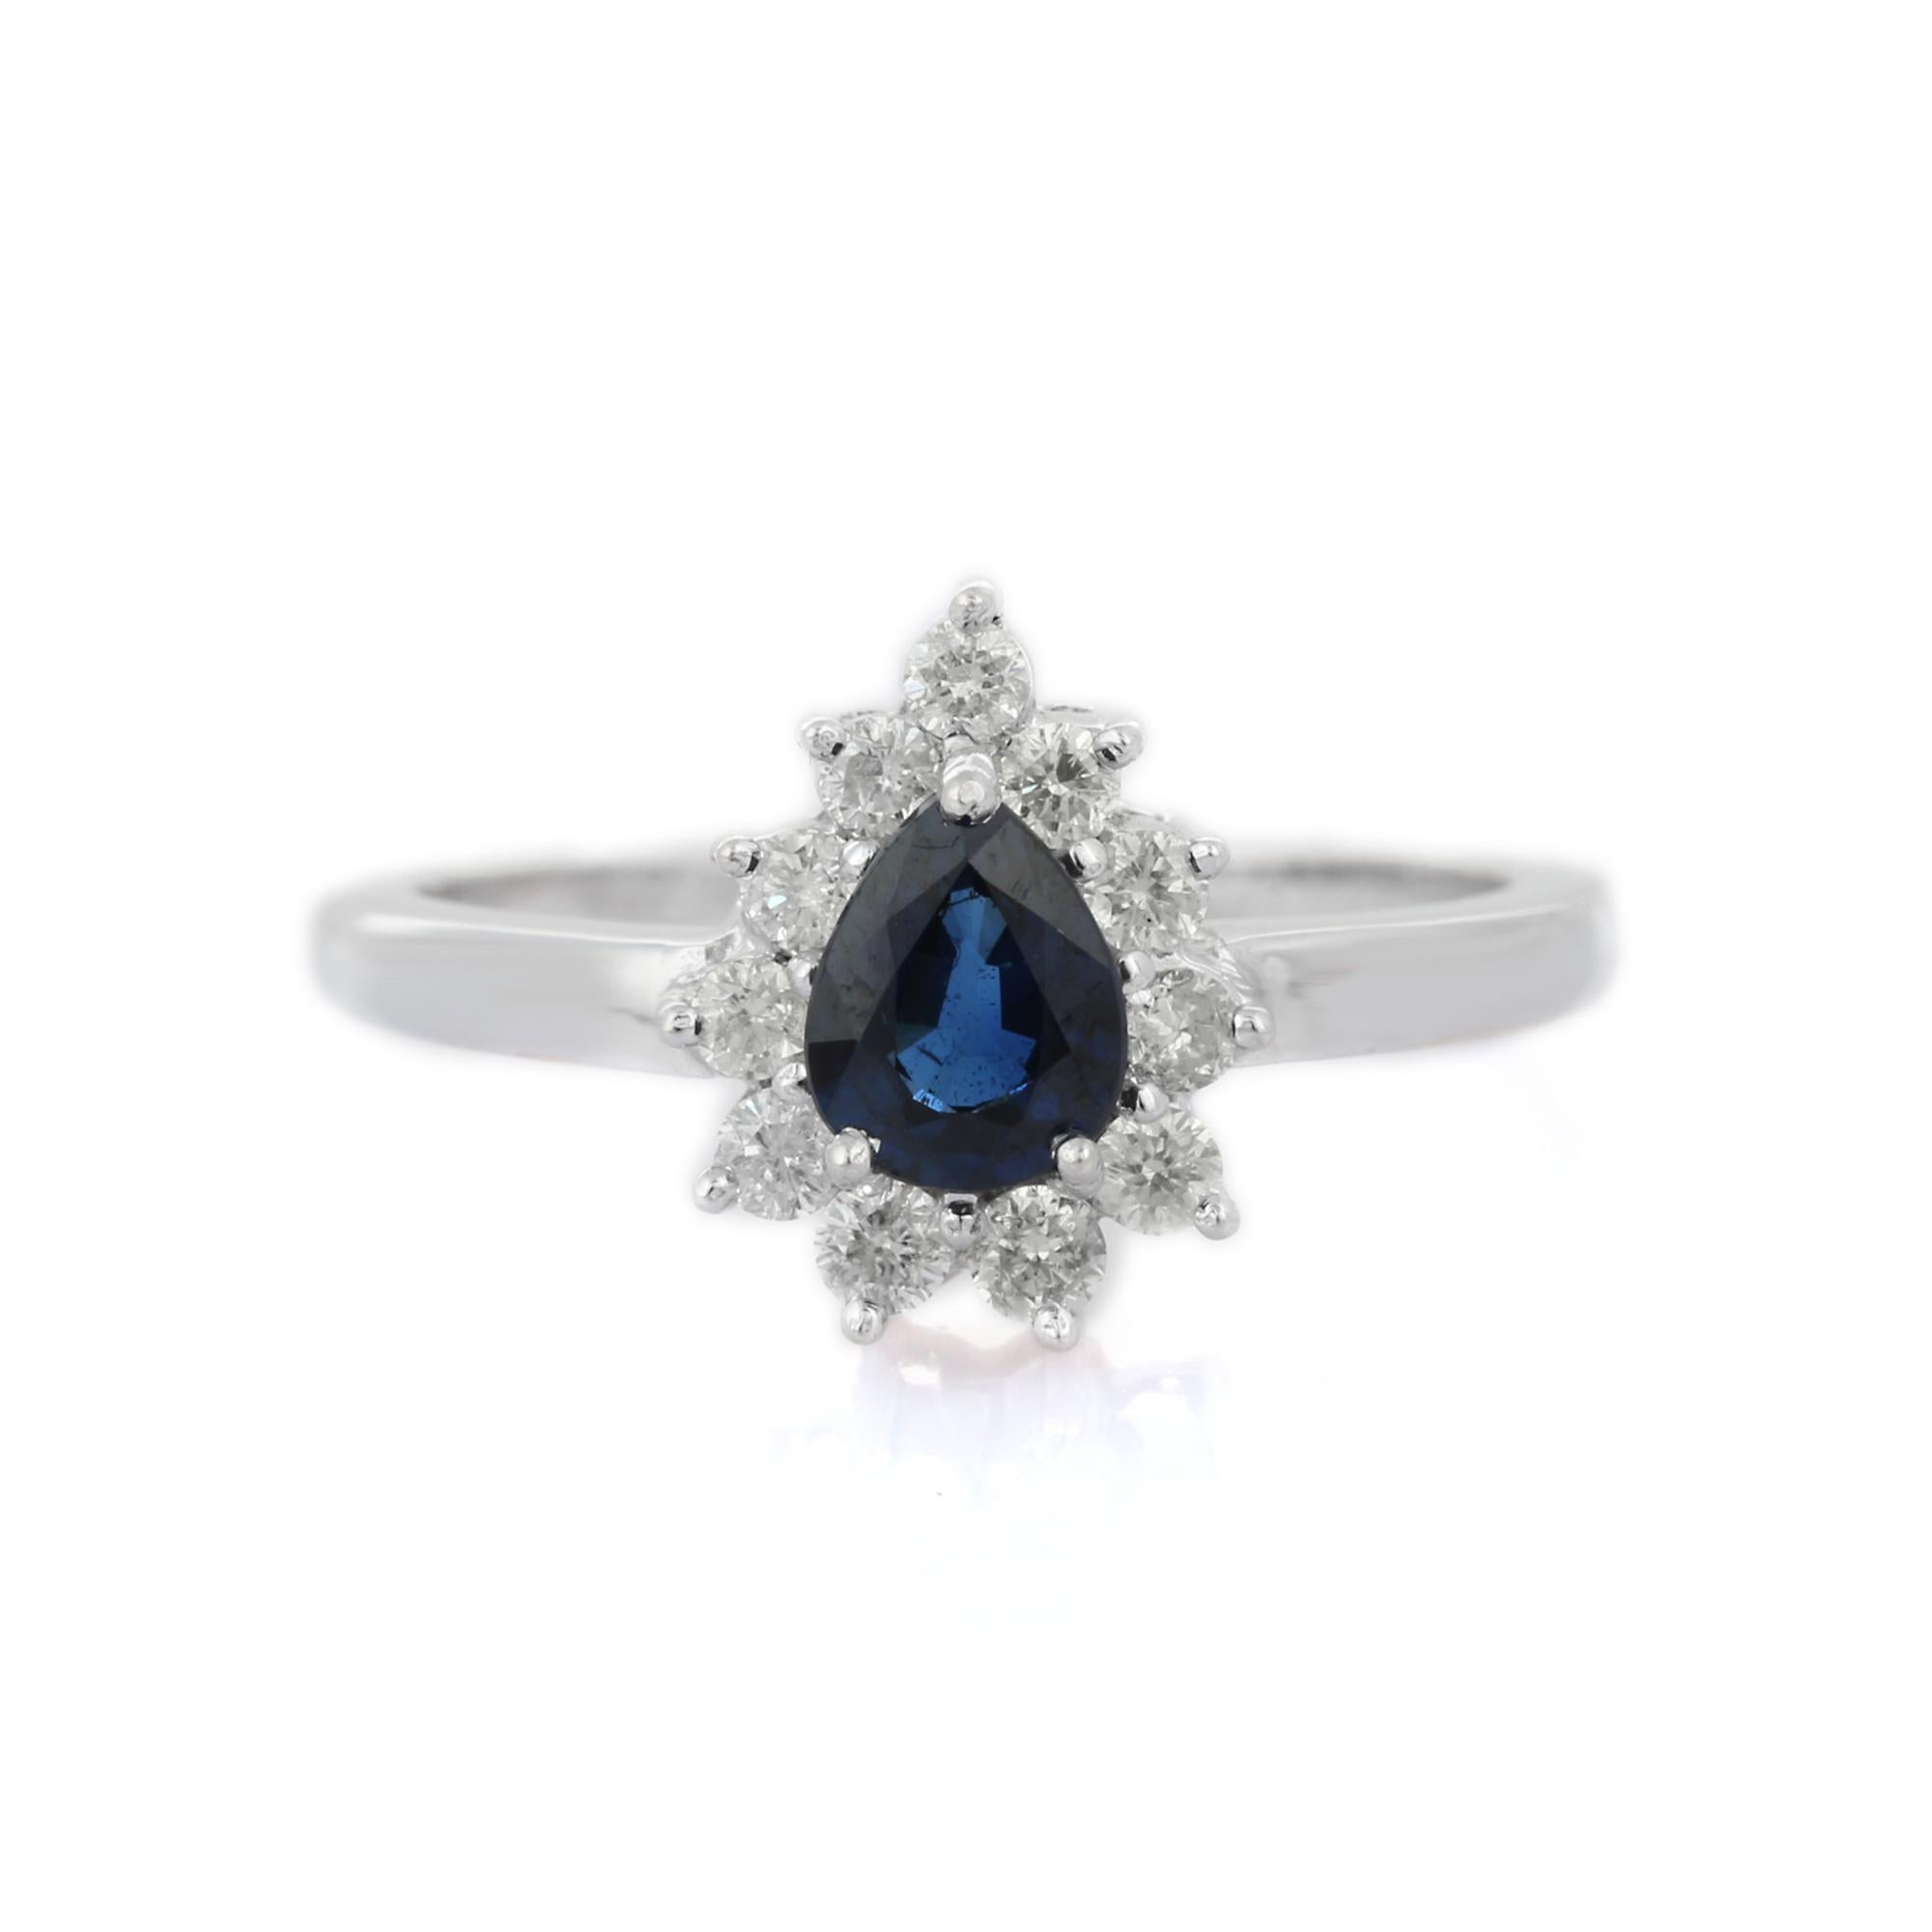 For Sale:  Handcrafted 14K White Gold Pear Cut Blue Sapphire and Halo Diamond Ring 2